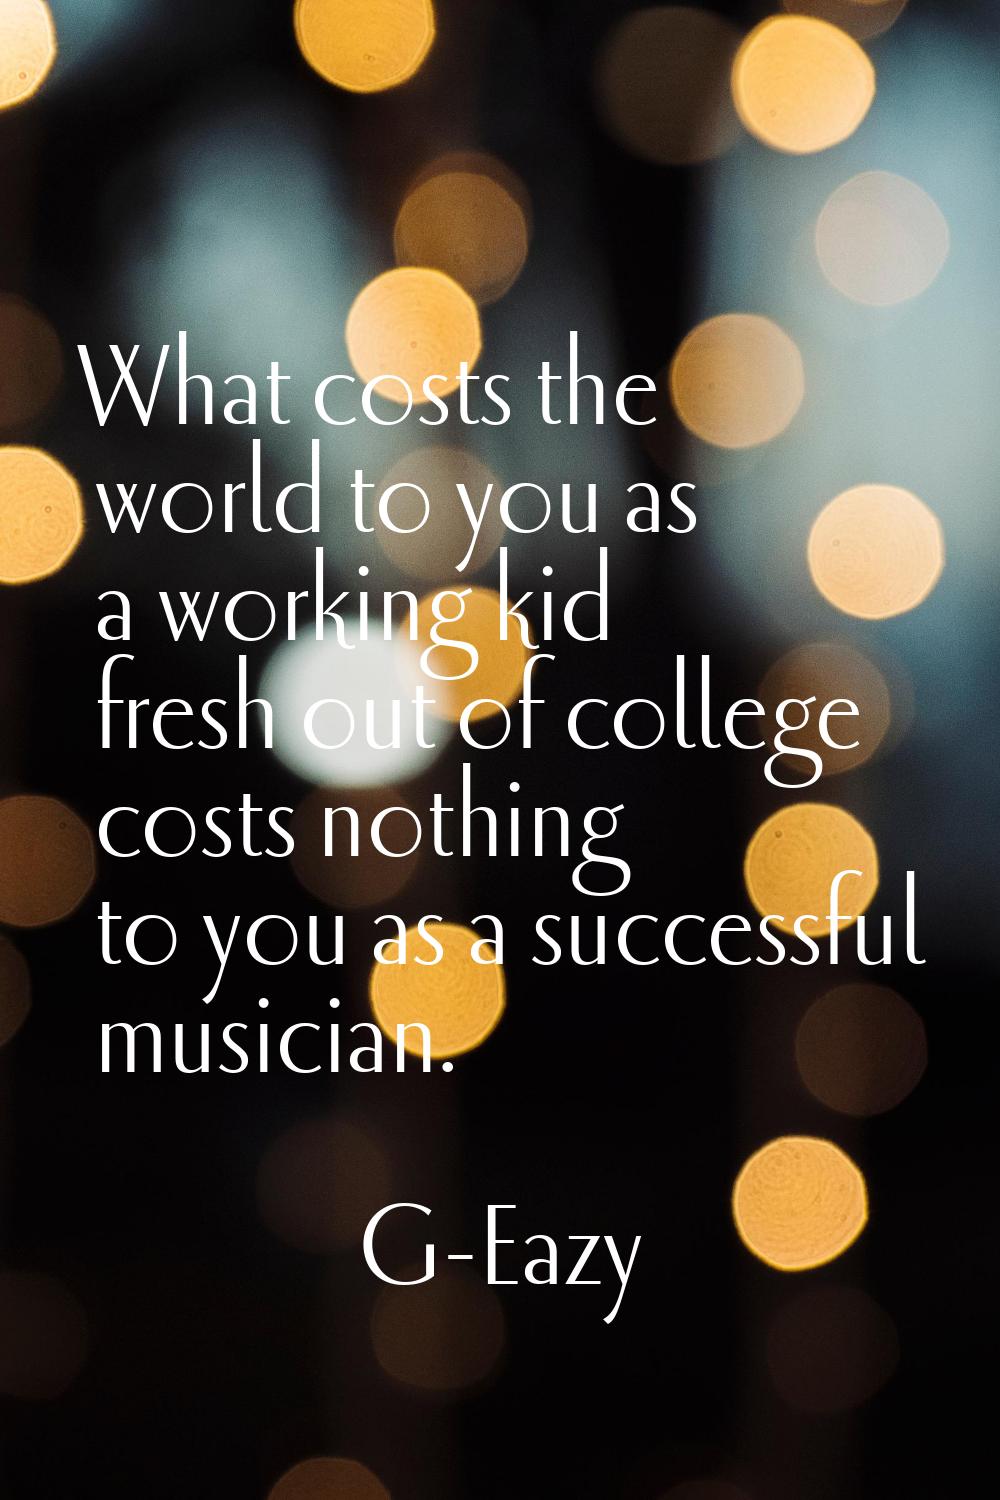 What costs the world to you as a working kid fresh out of college costs nothing to you as a success